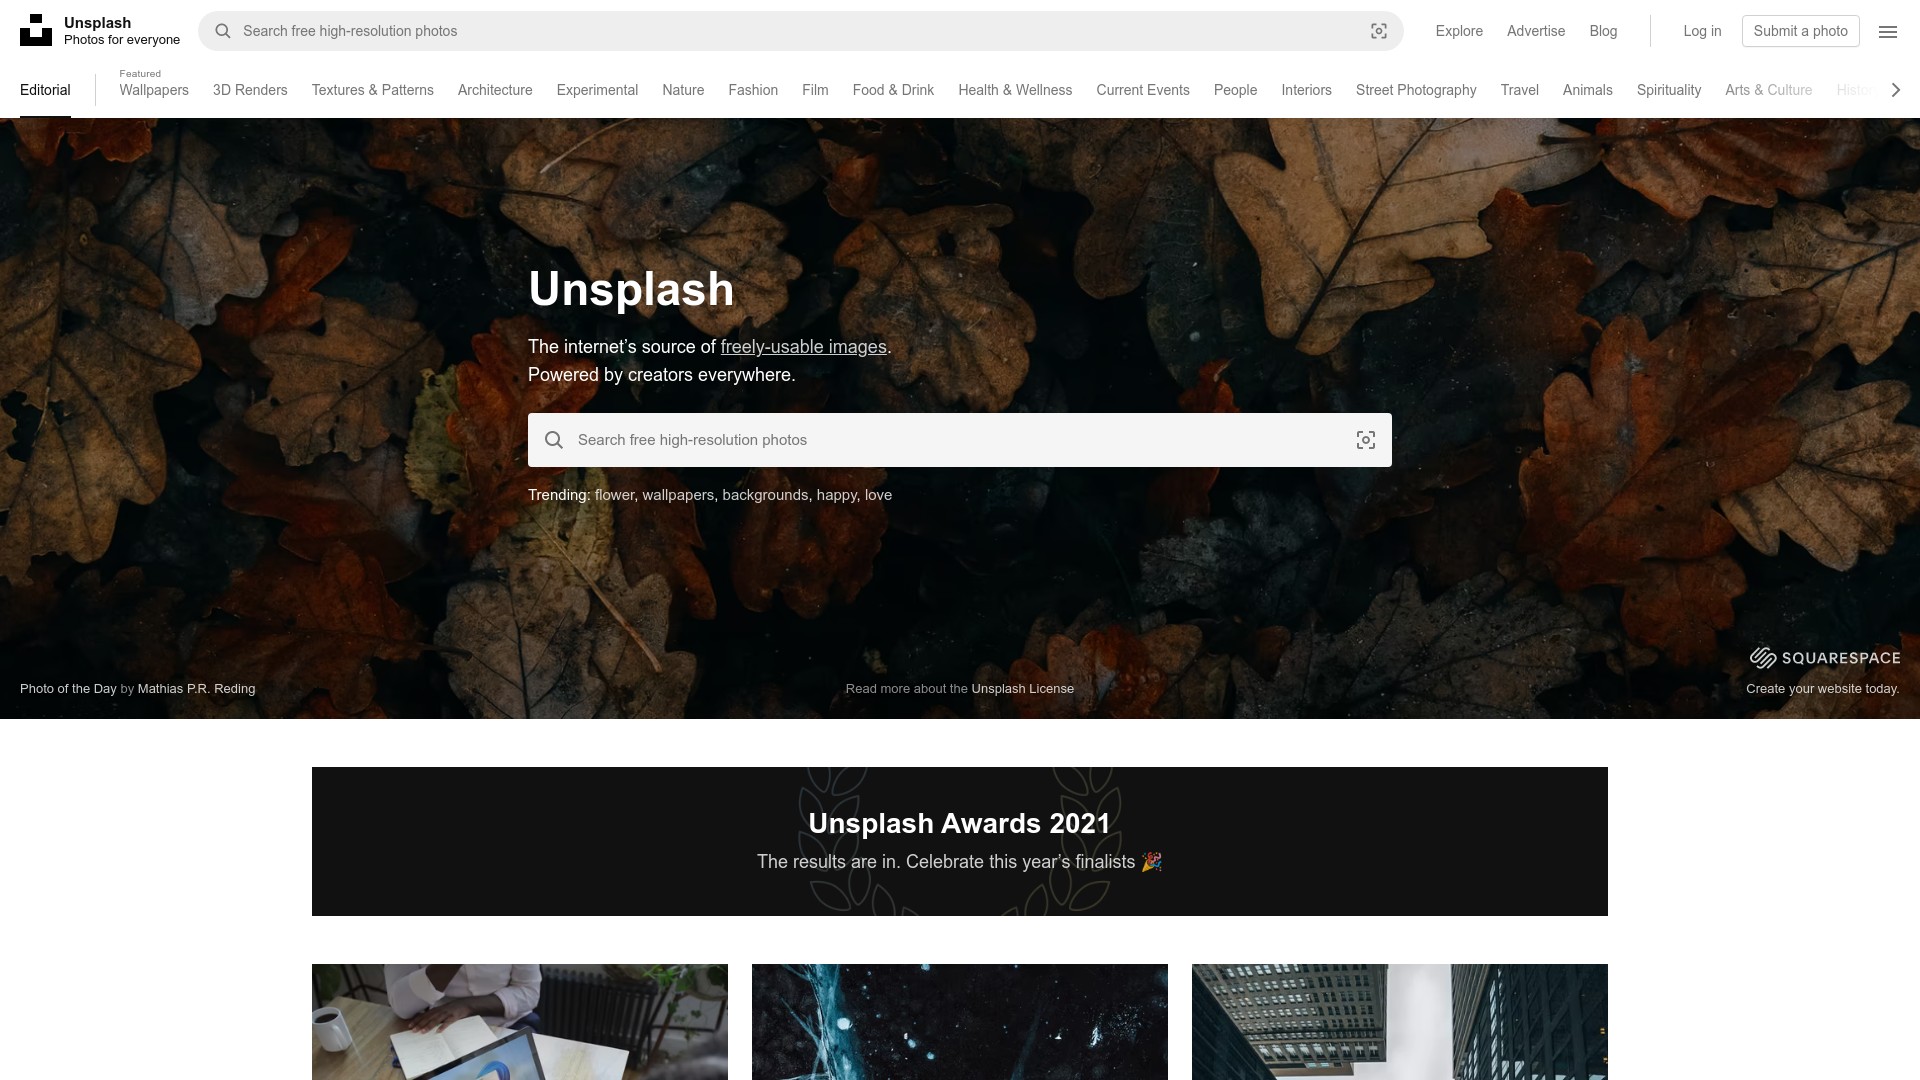 Unsplash is a website dedicated to sharing stock photography under the Unsplash license. Since 2021, it has been owned by Getty Images. 